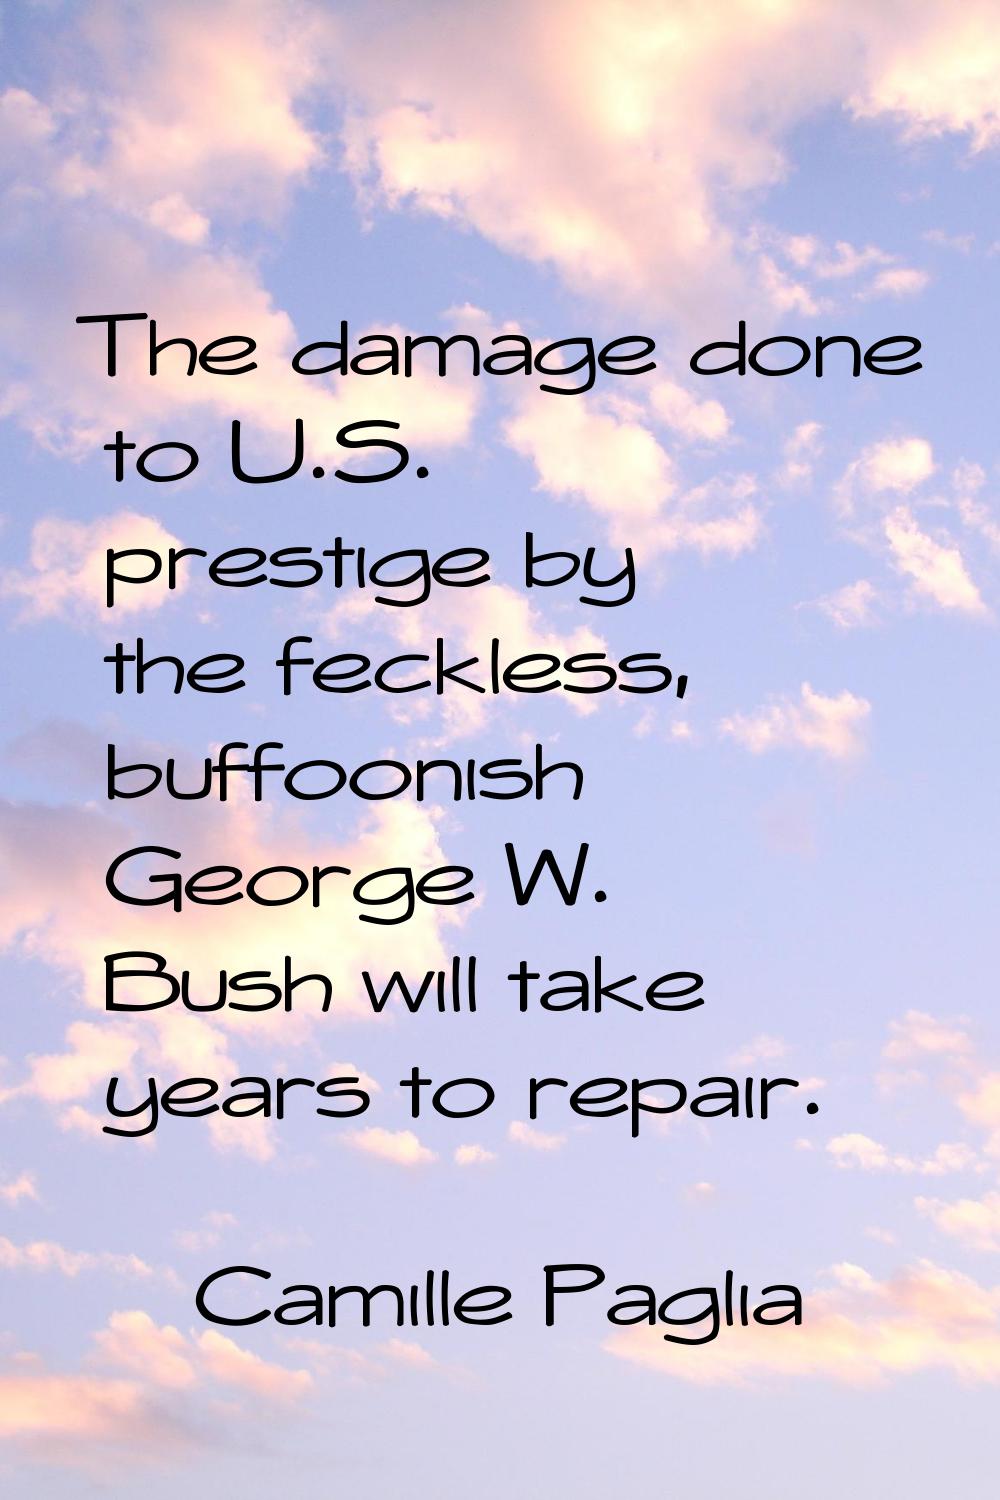 The damage done to U.S. prestige by the feckless, buffoonish George W. Bush will take years to repa